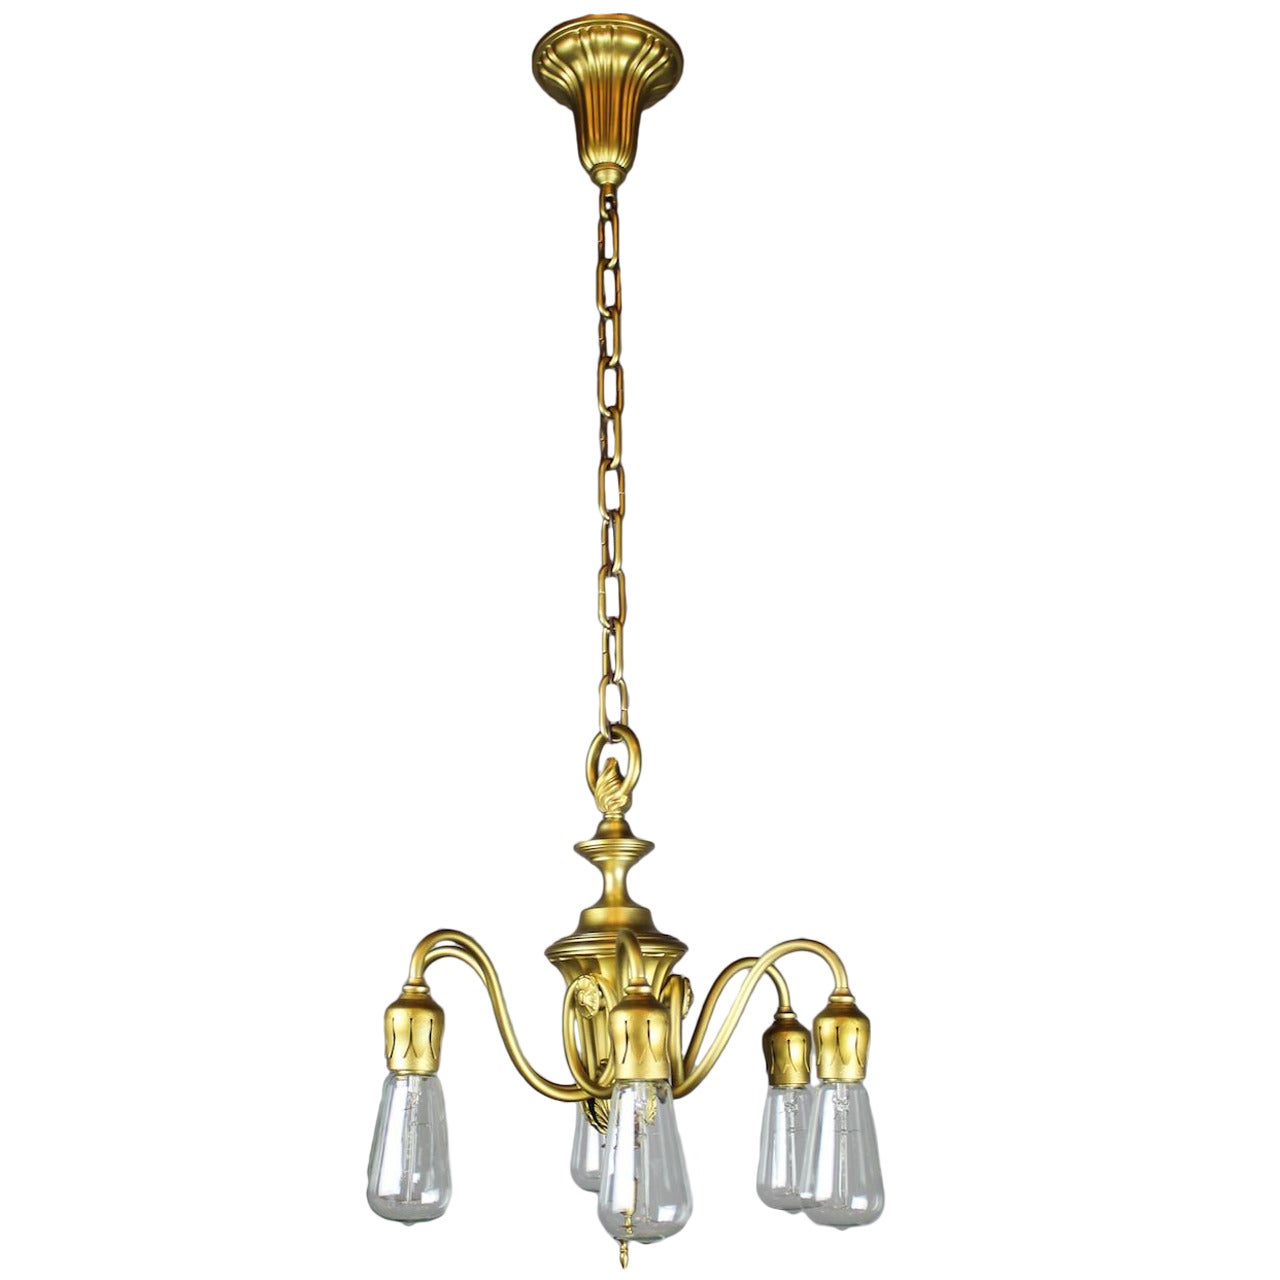 Adam's Style Bare Bulb, Six-Light Fixture by R. Williamson & Co. For Sale